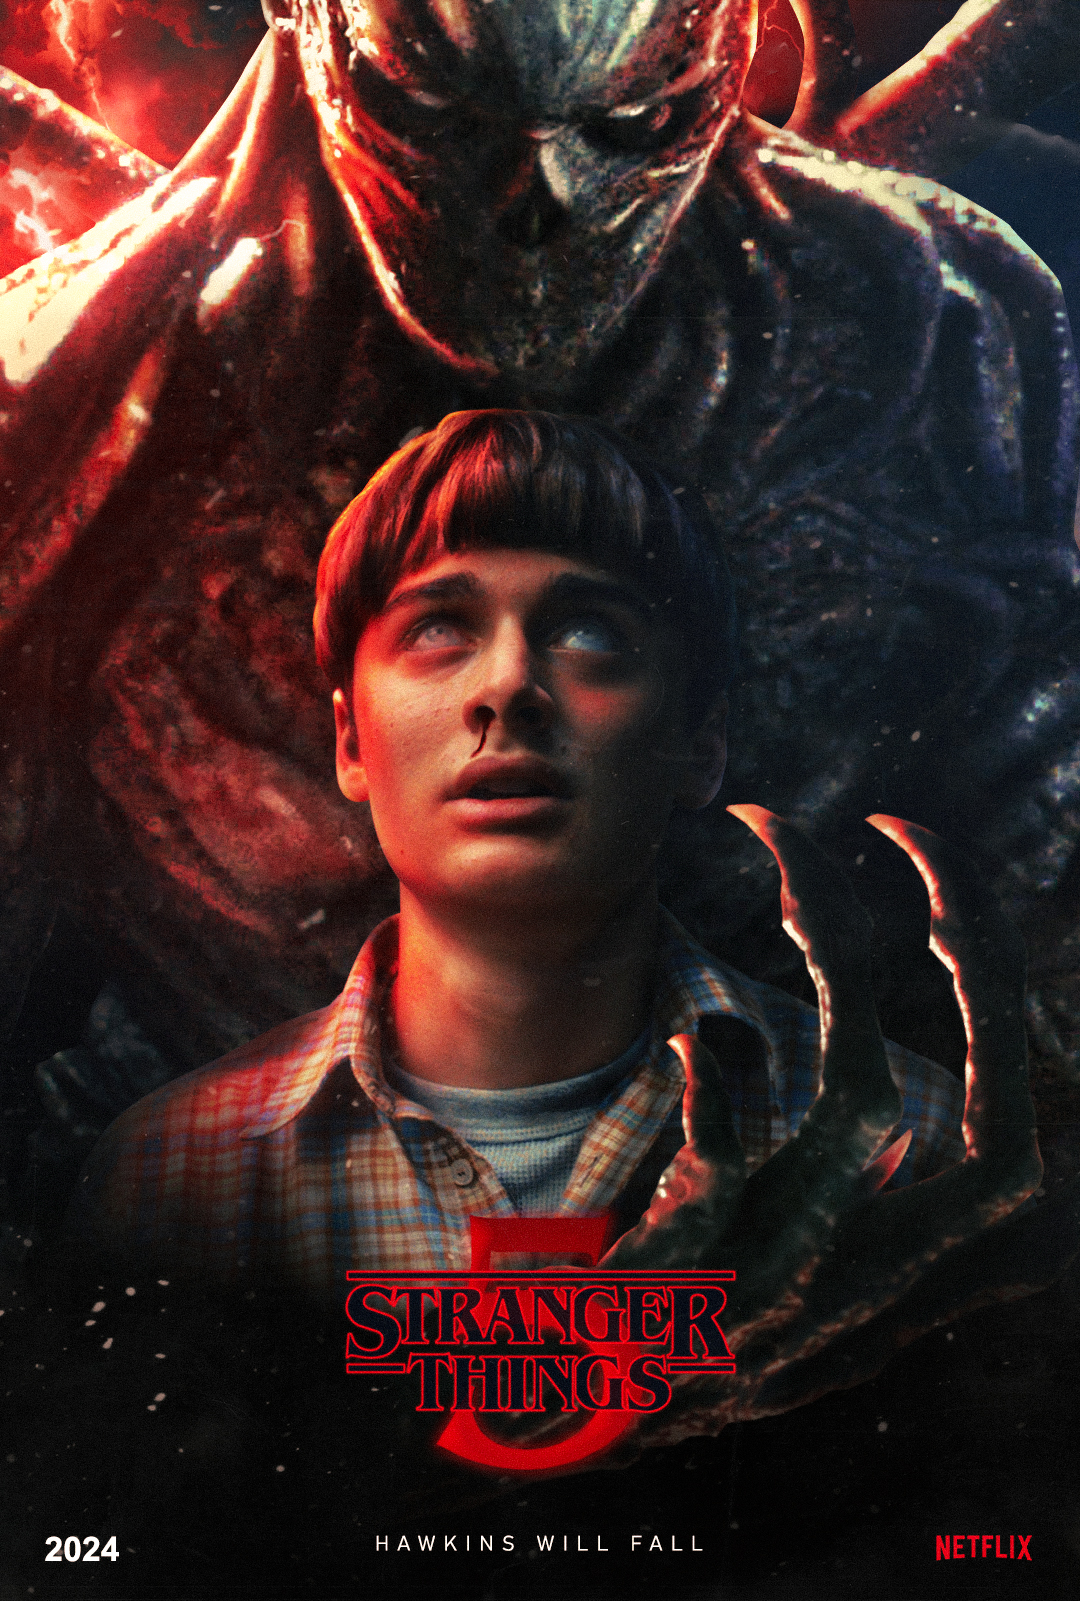 almirondesign — STRANGER THINGS 5 CHARACTER POSTER FANART MAX